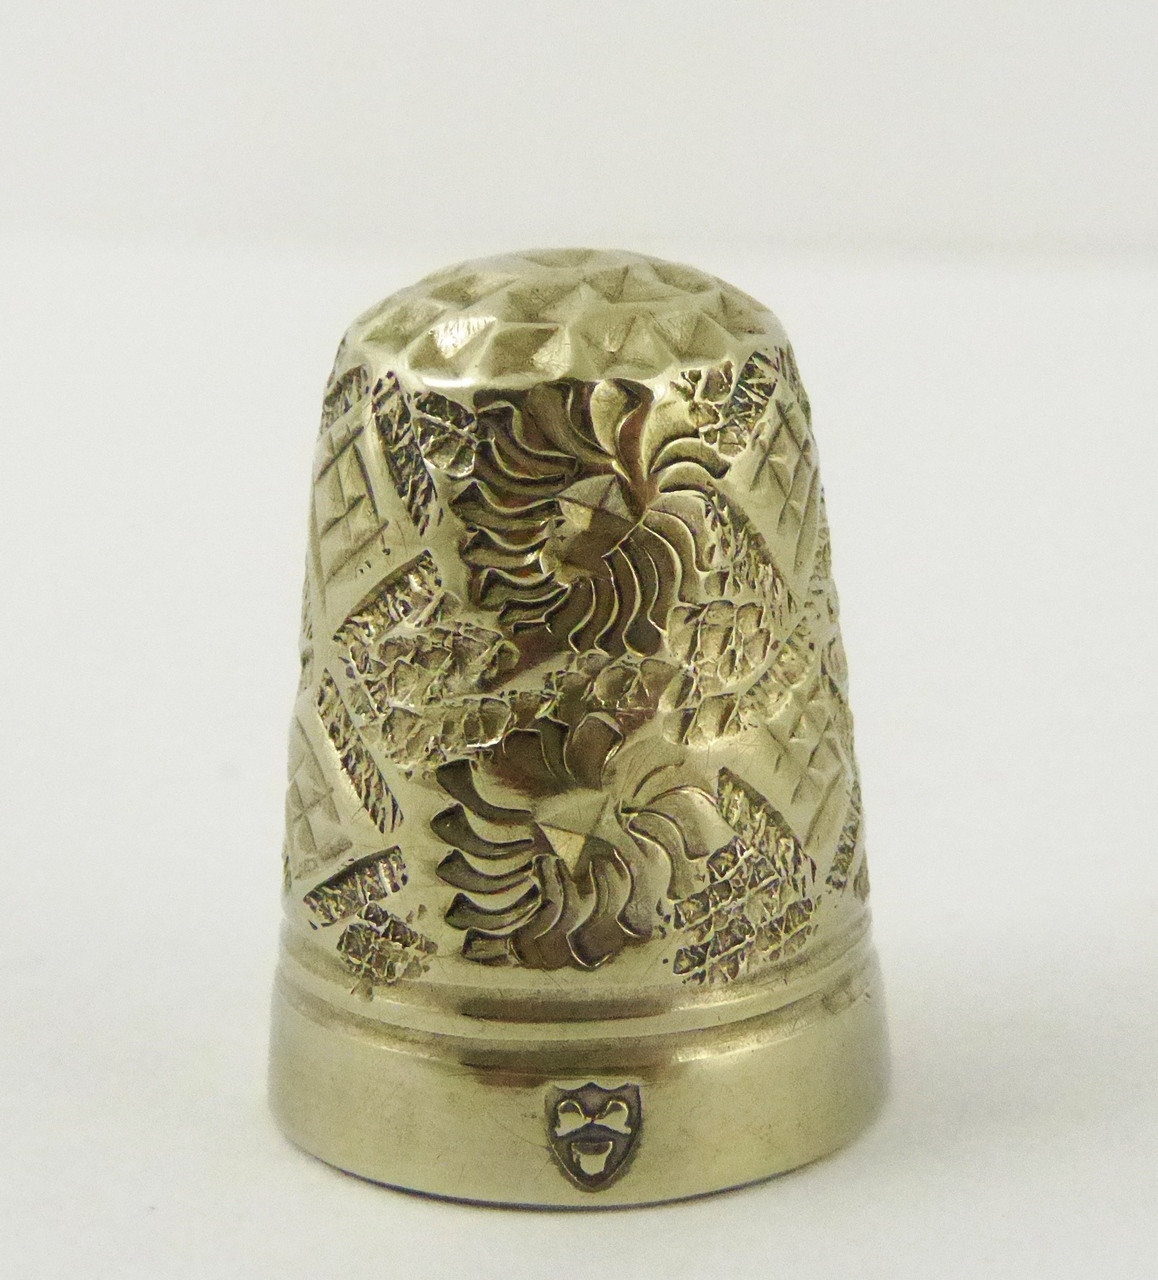 SILVER DRAGON FLY THIMBLE HALLMARKED STERLING SILVER DRAGON FLY THIMBLE 